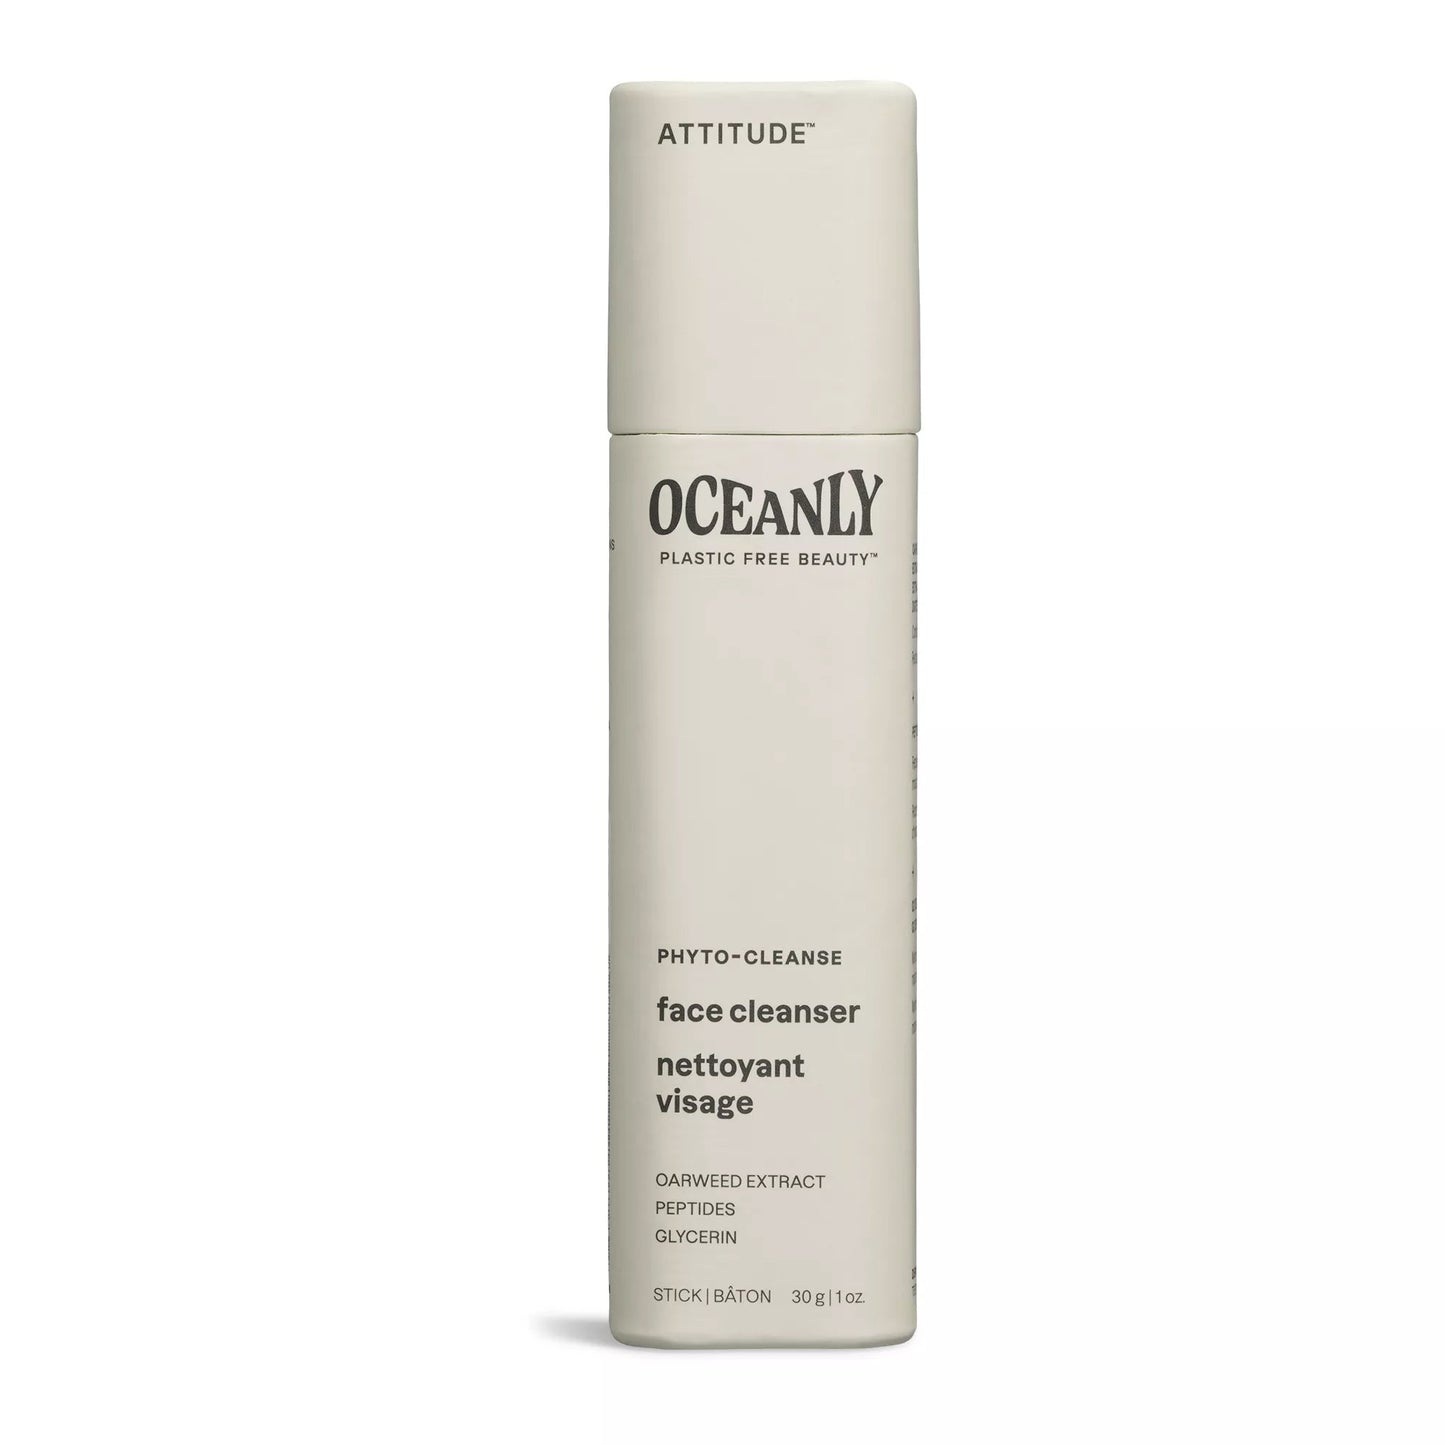 ATTITUDE Oceanly Phyto-Cleanse Face Cleanser Unscented 30g 16064_en? Unscented 30g